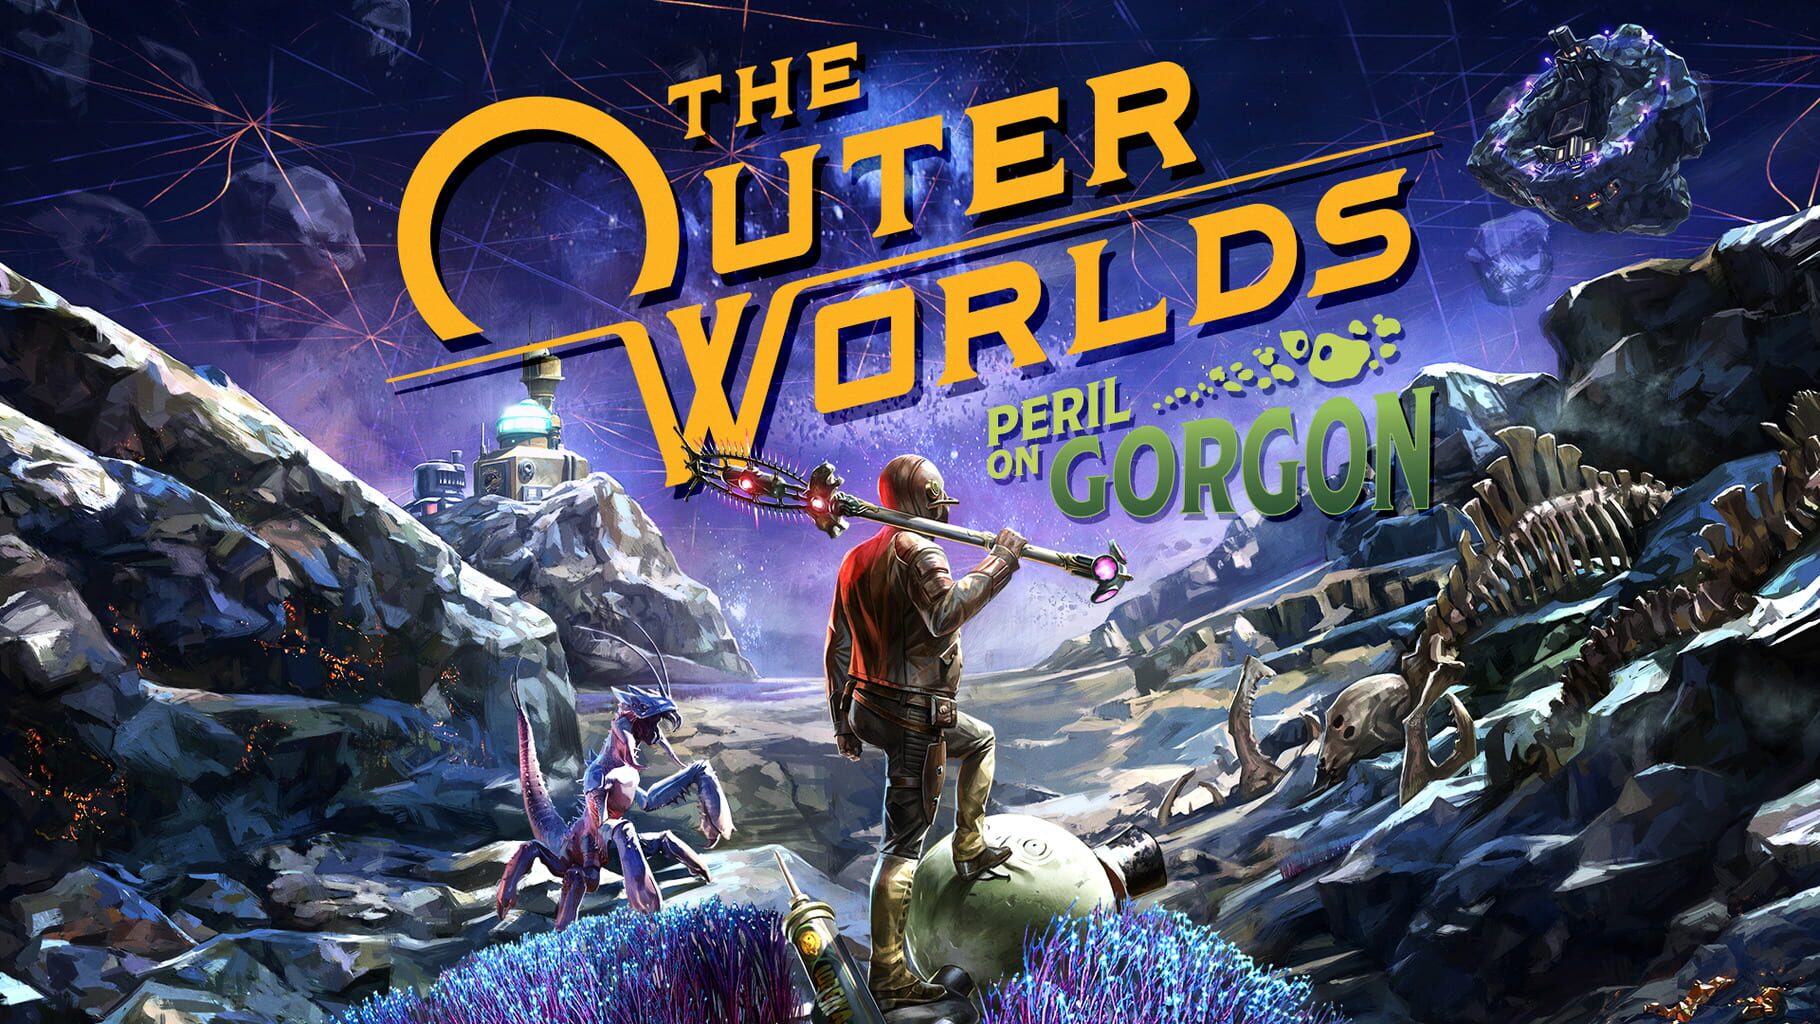 Artwork for The Outer Worlds: Peril on Gorgon